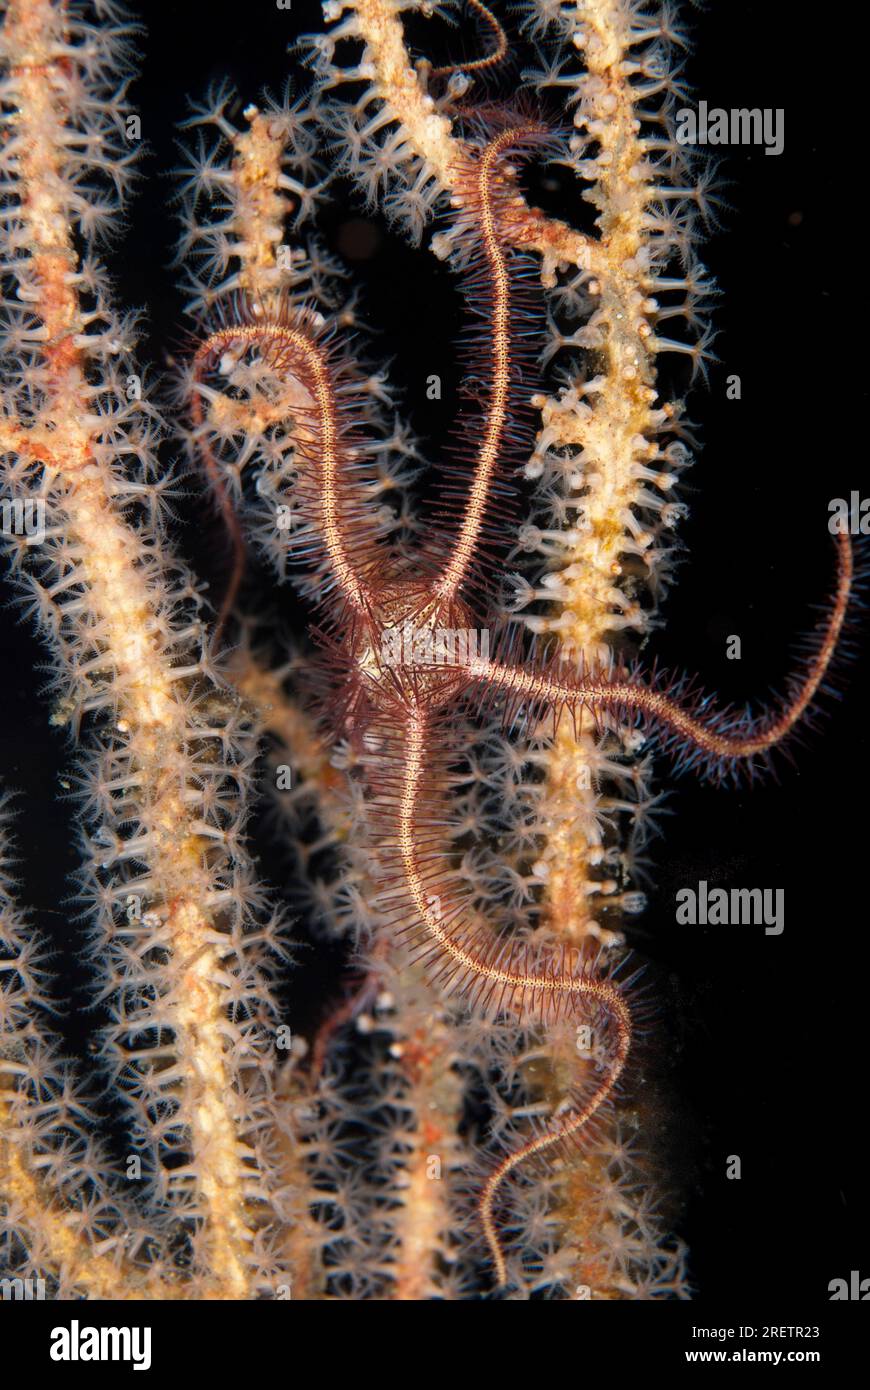 Brittle Star, Ophiothrix sp, on coral, night dive, Nudi Retreat dive site, Lembeh Straits, Sulawesi, Indonesia Stock Photo